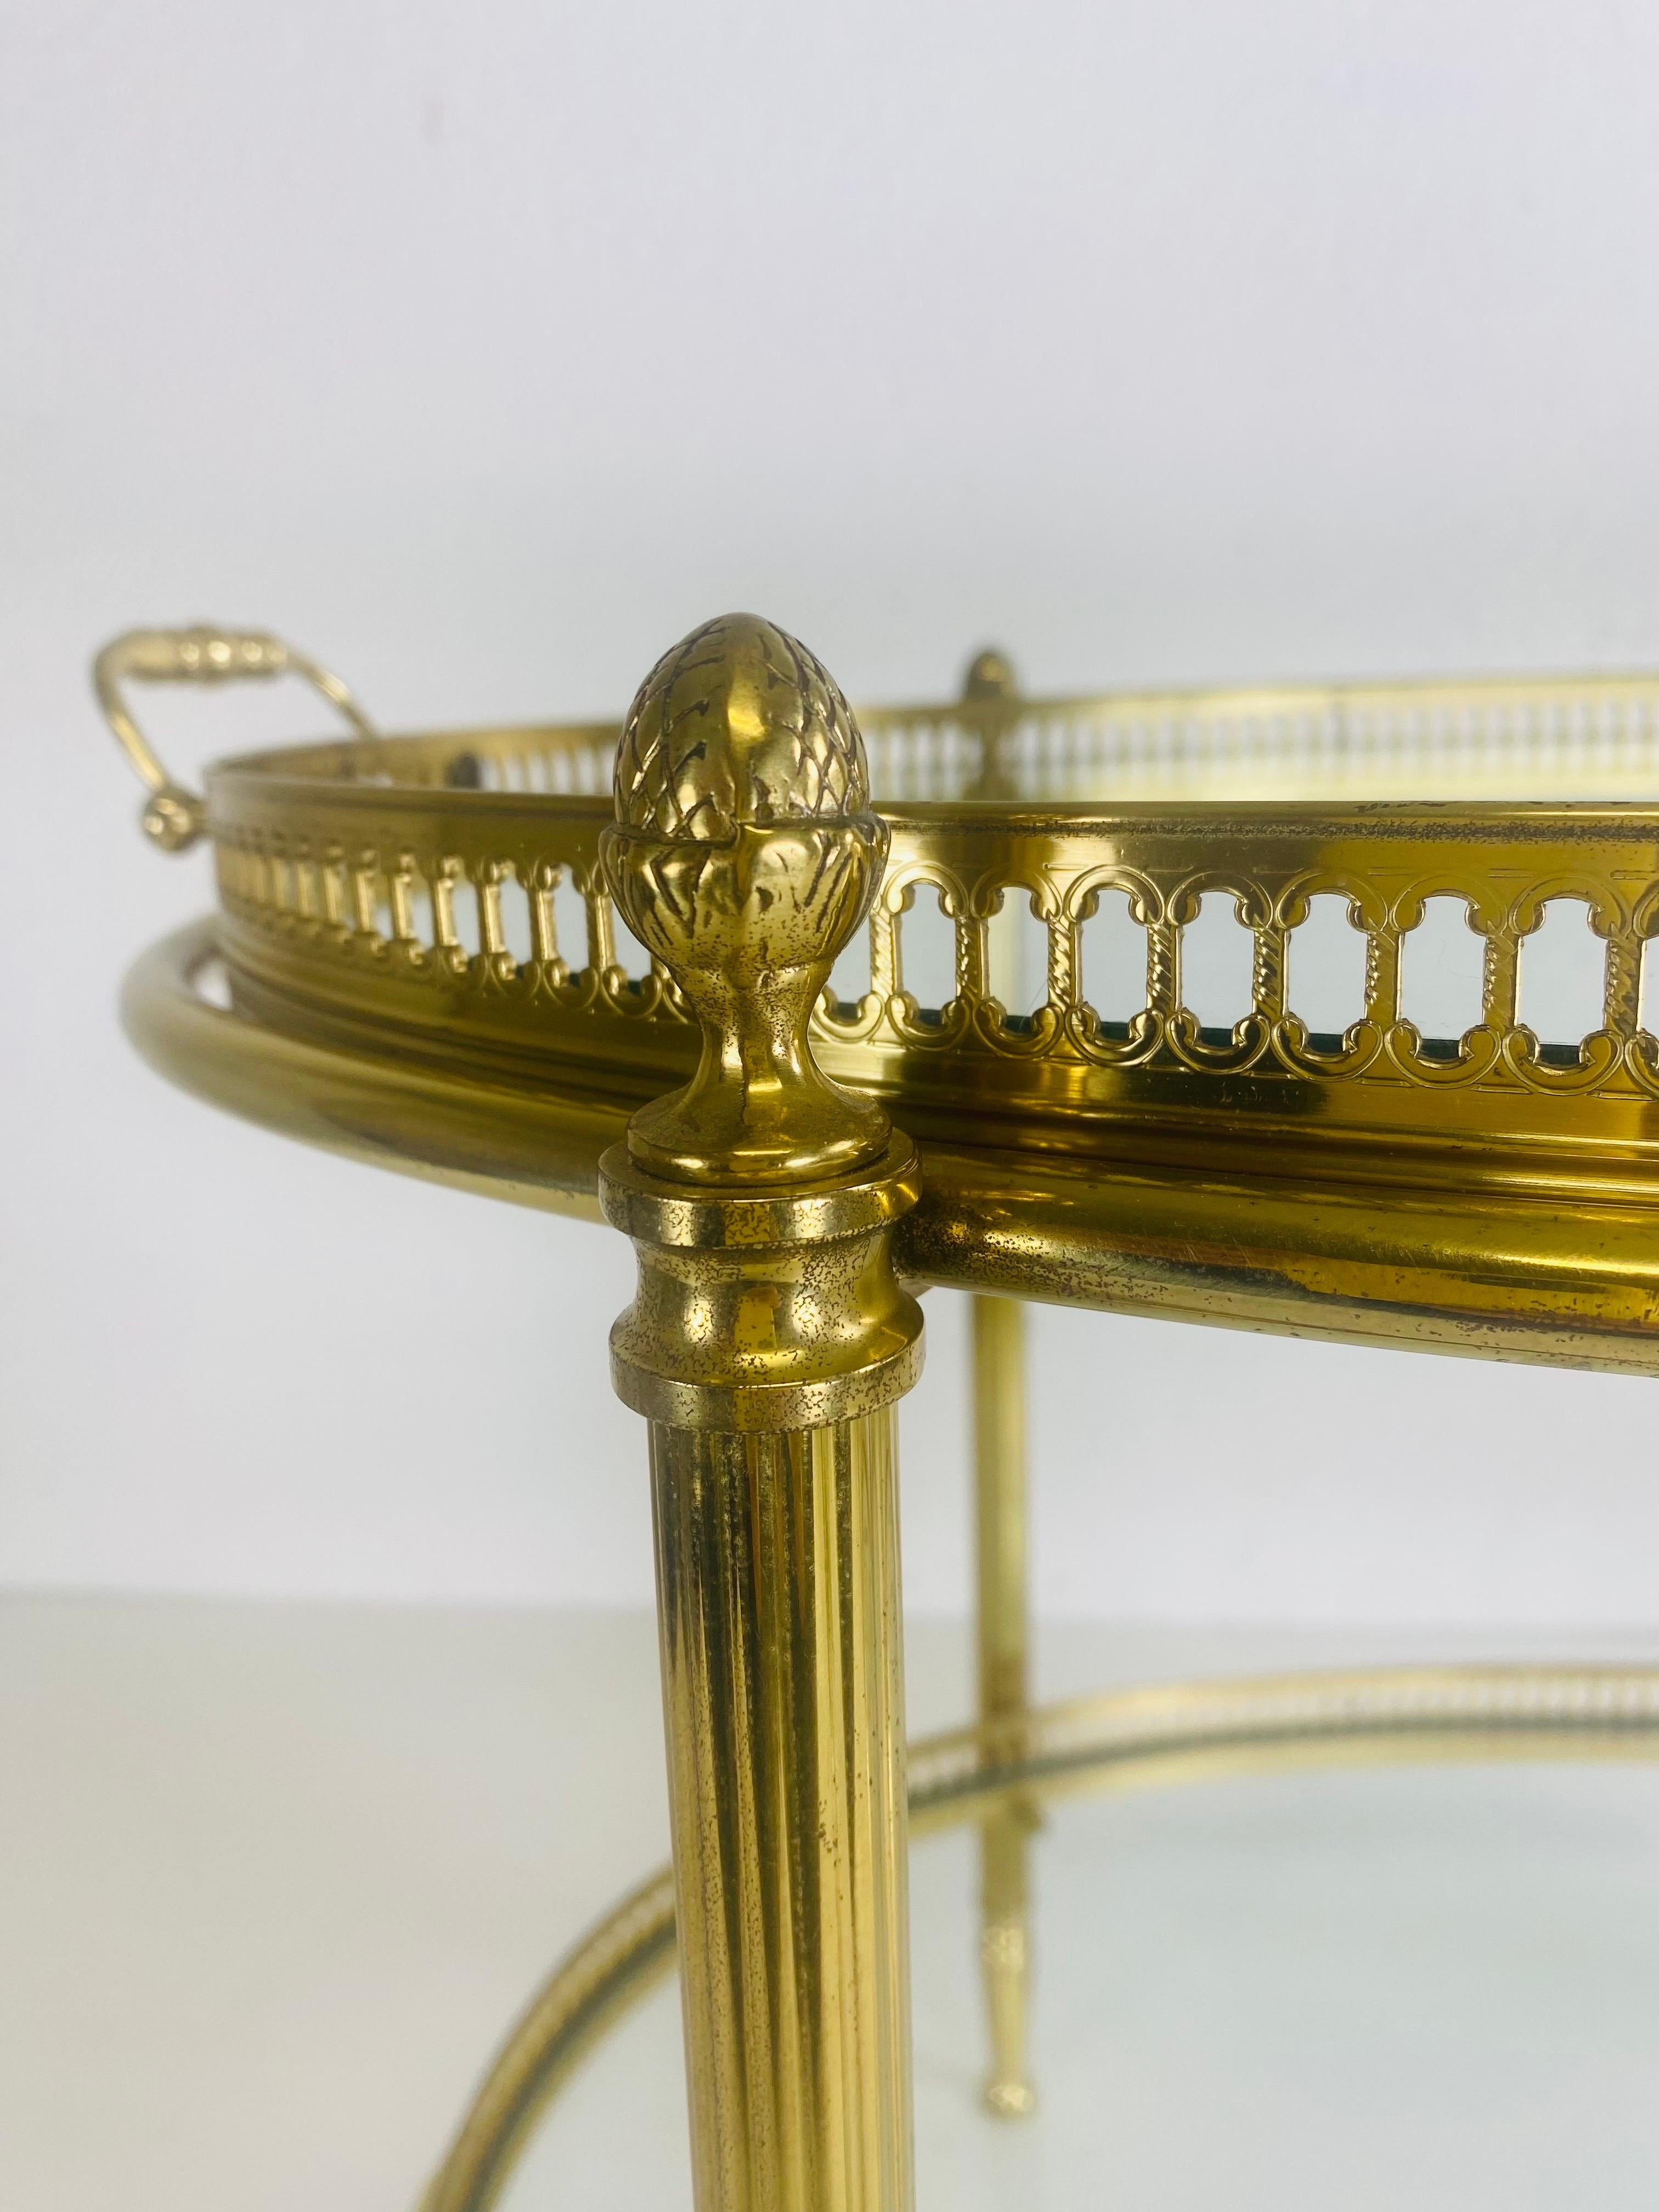 This is a solid brass side table that comes with two detachable gallery trays. The top tray has handles on either side as the lower tray does not. The table stands on four fluted legs with acorn finals at the top. The two trays have a beautiful